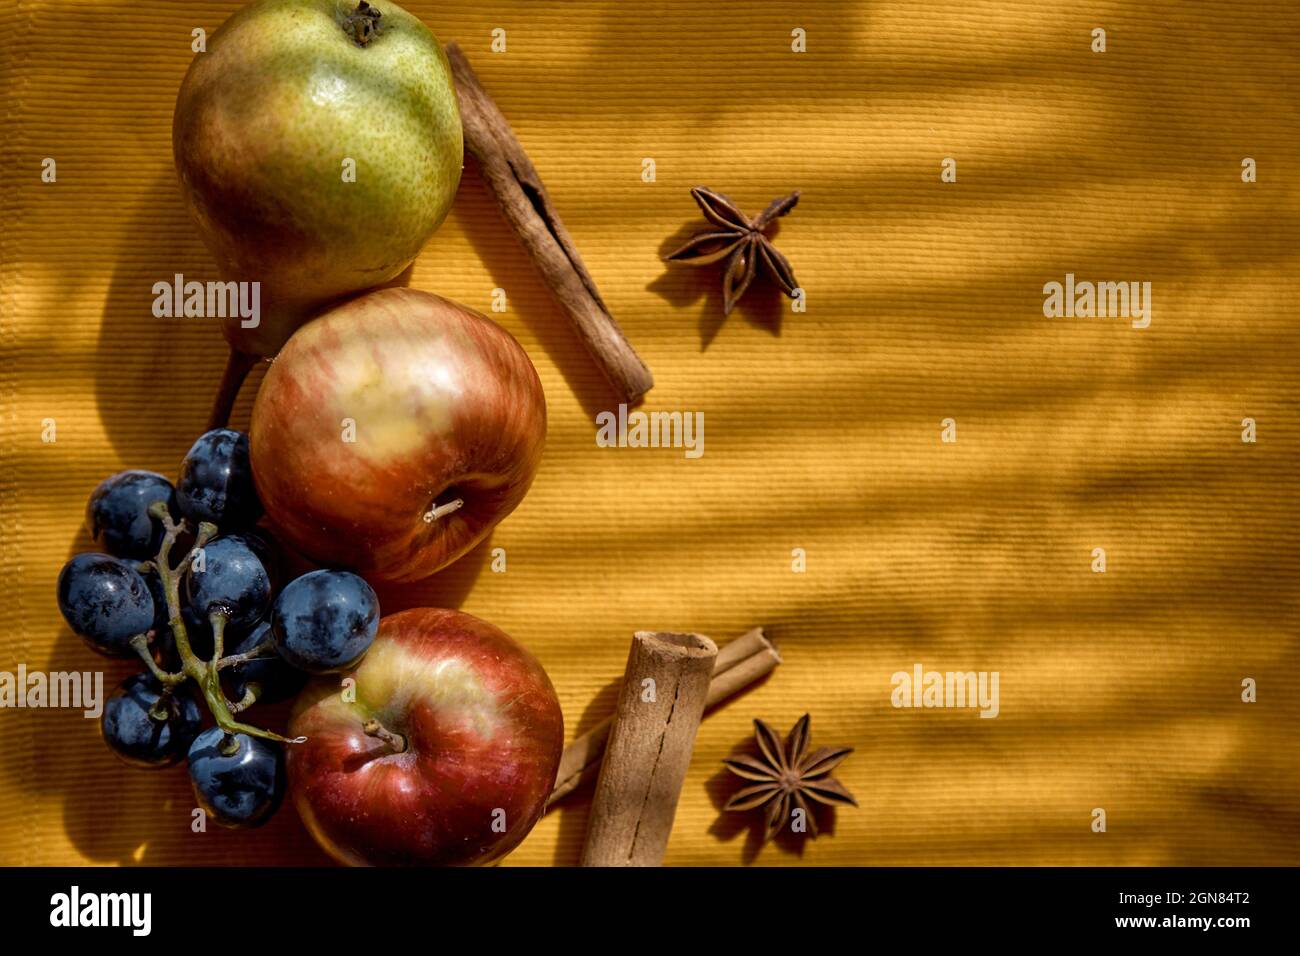 Autumn food with copy space and trendy shadows. Creative fruits photography: group of grapes, apples, star anise and cinnamon sticks. Top view. Vitamins, healthy food concept. Autumn mood board. Stock Photo